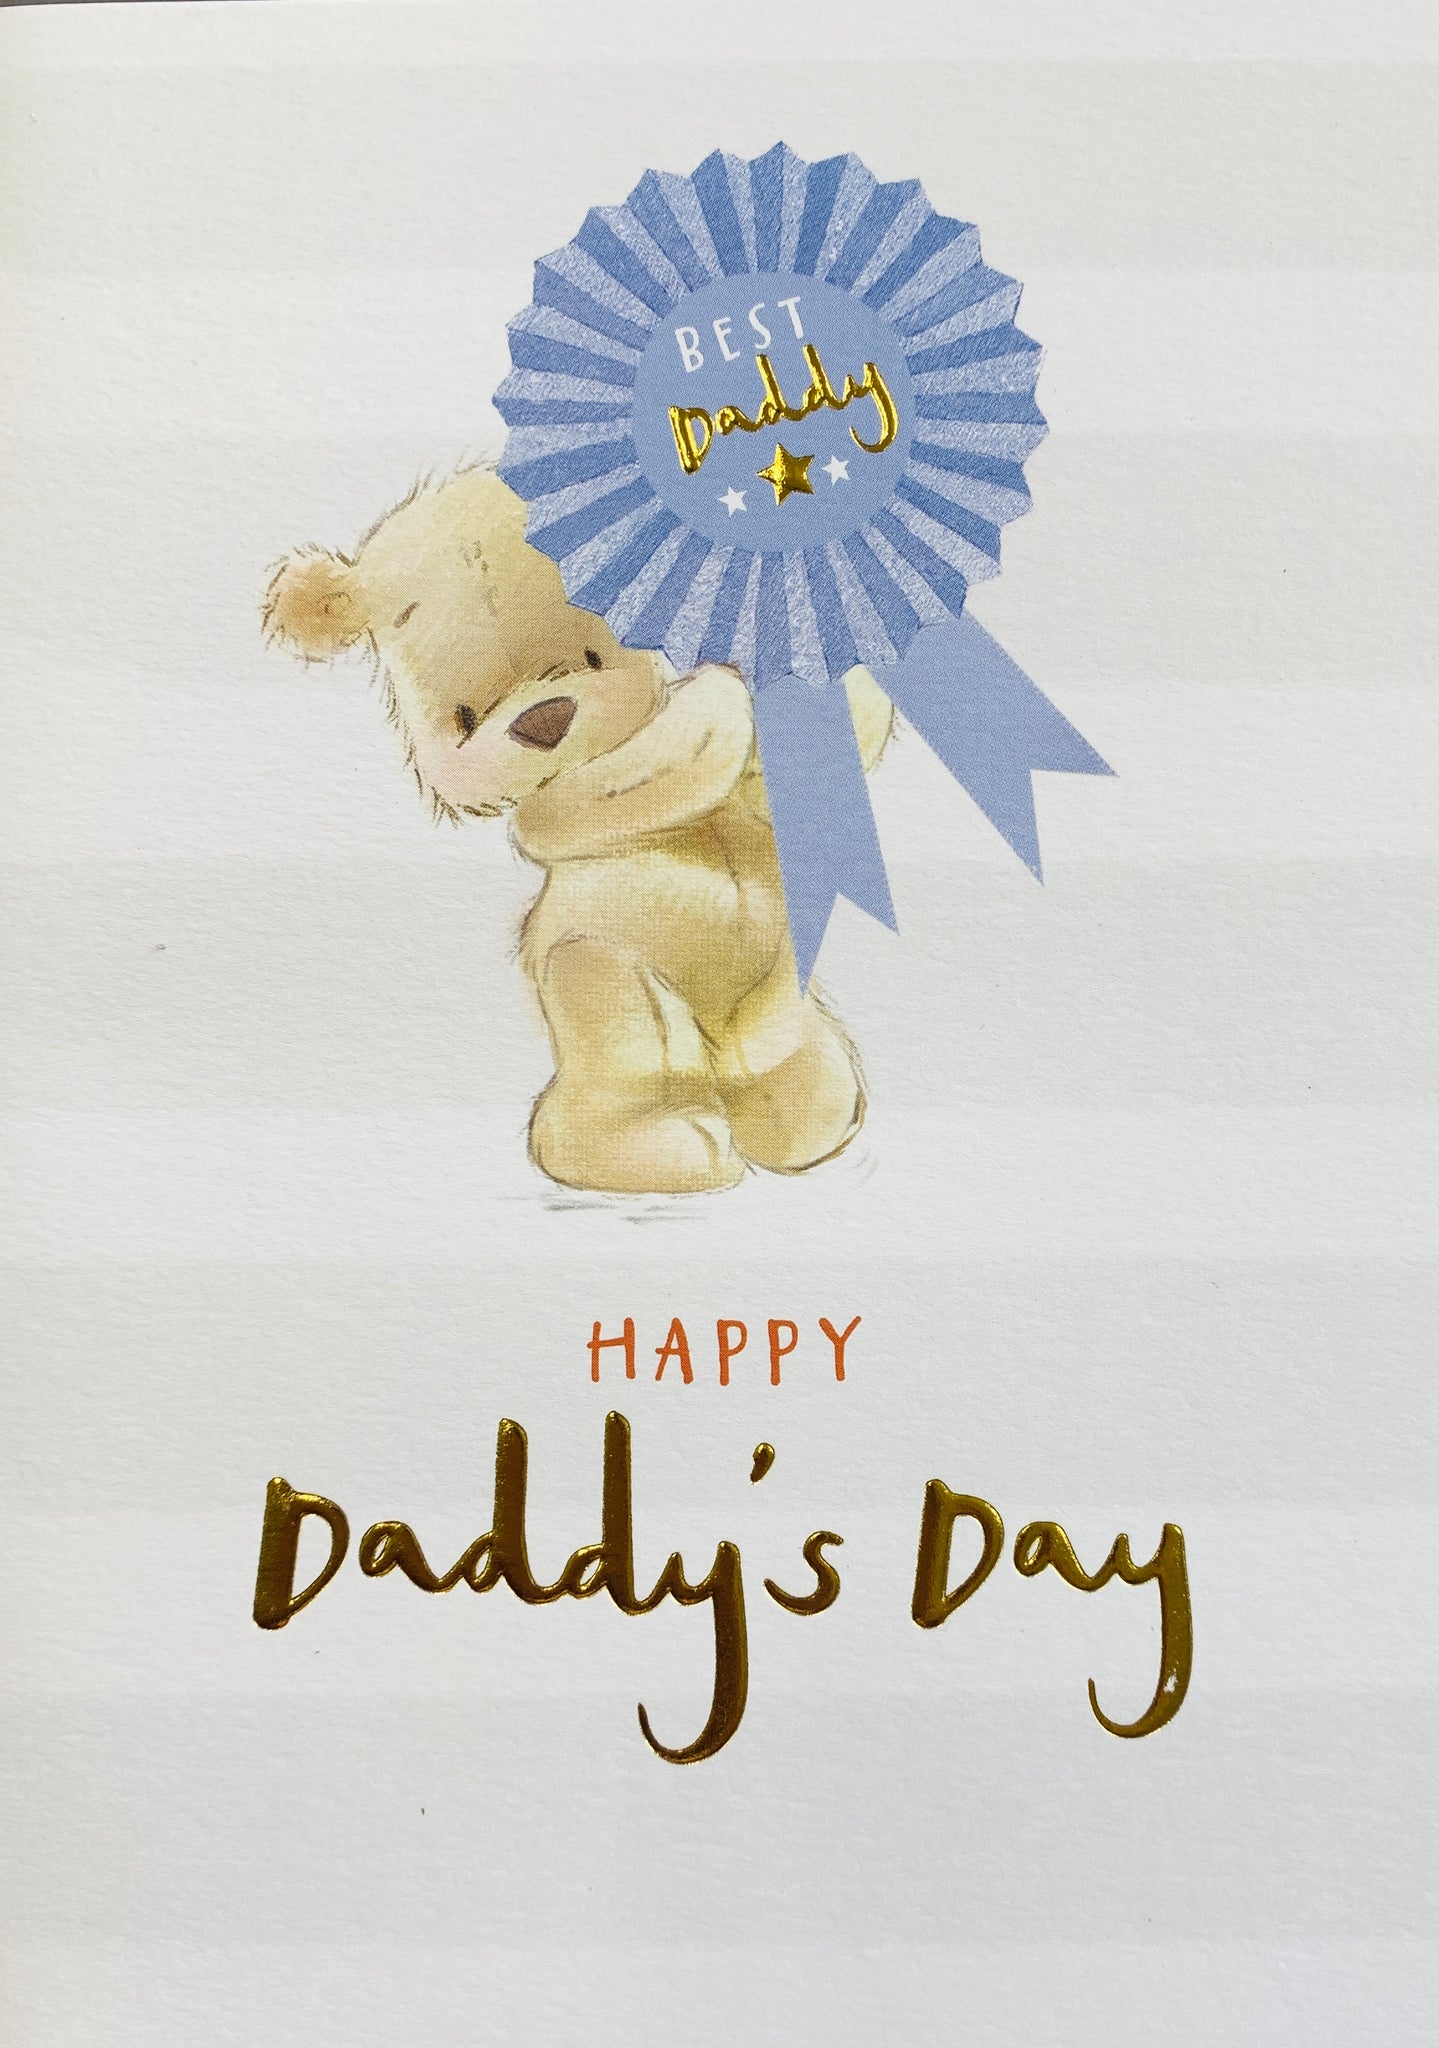 Daddy Father’s Day card cute bear holding rosette